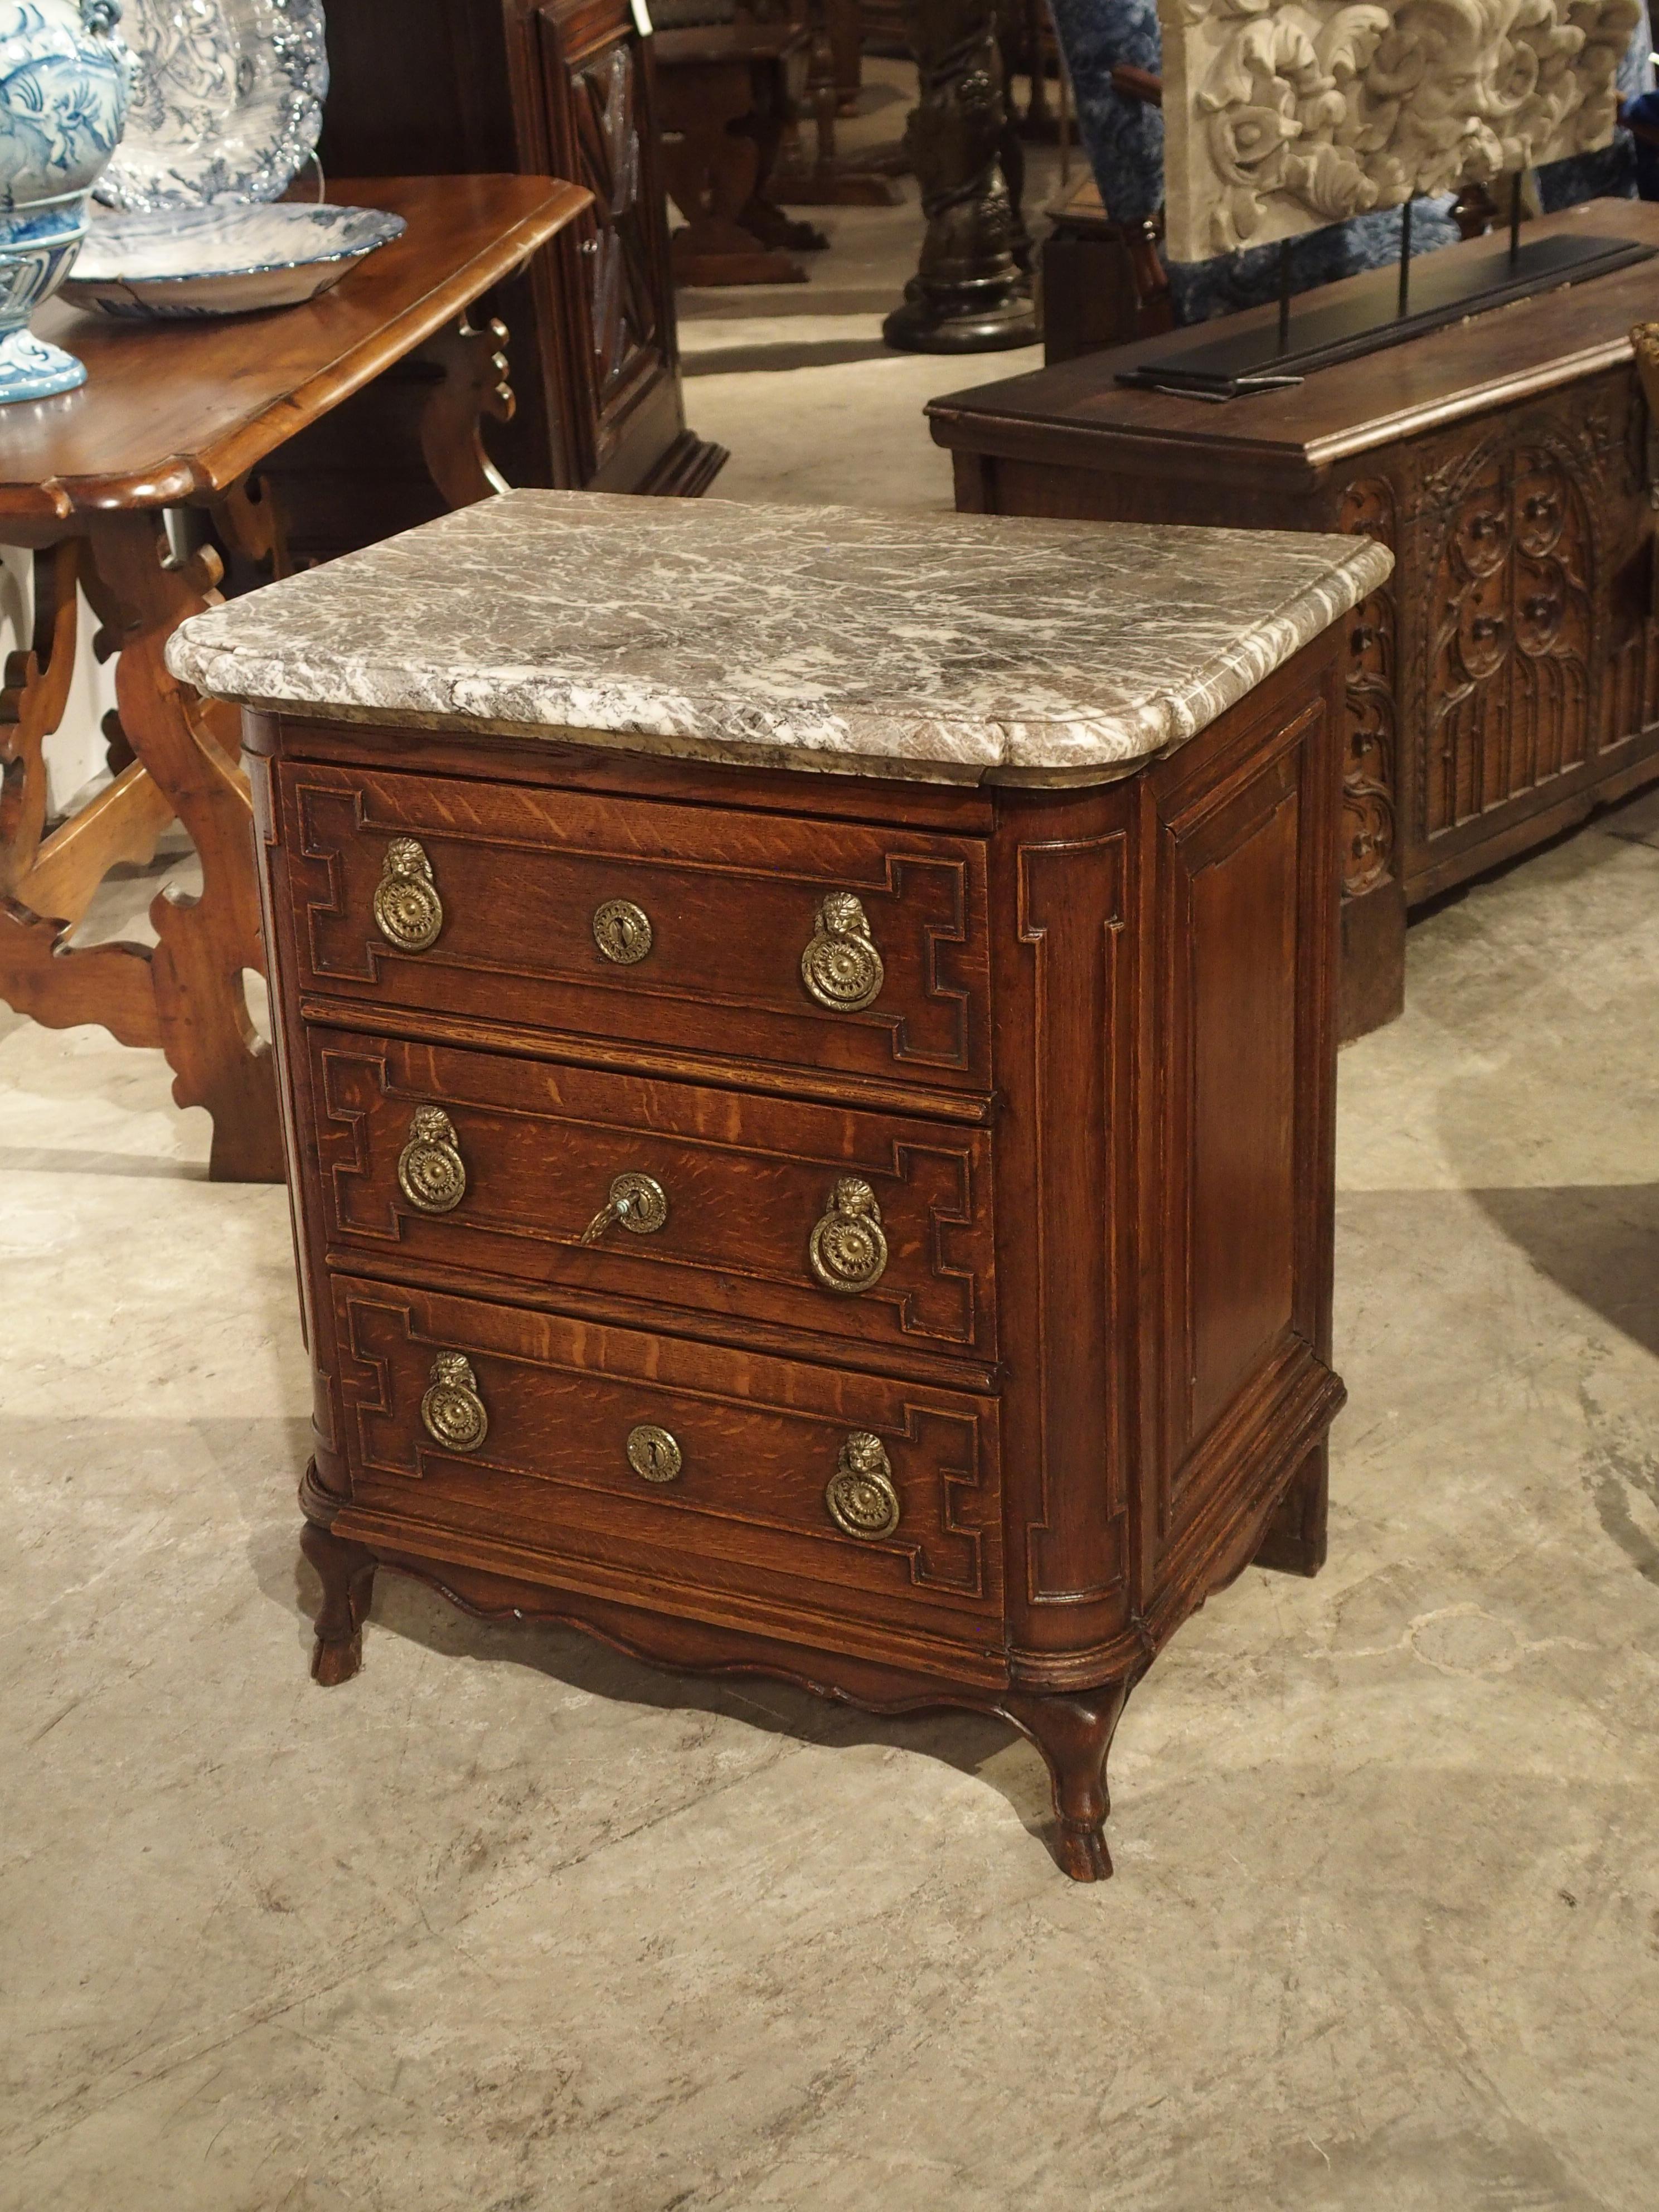 From circa 1770, this small French oak commode with marble top is in great condition. The marble top is quite thick at two inches, which means this chest of drawers can be used in the bedroom as a night table or in the bathroom with a small sink on